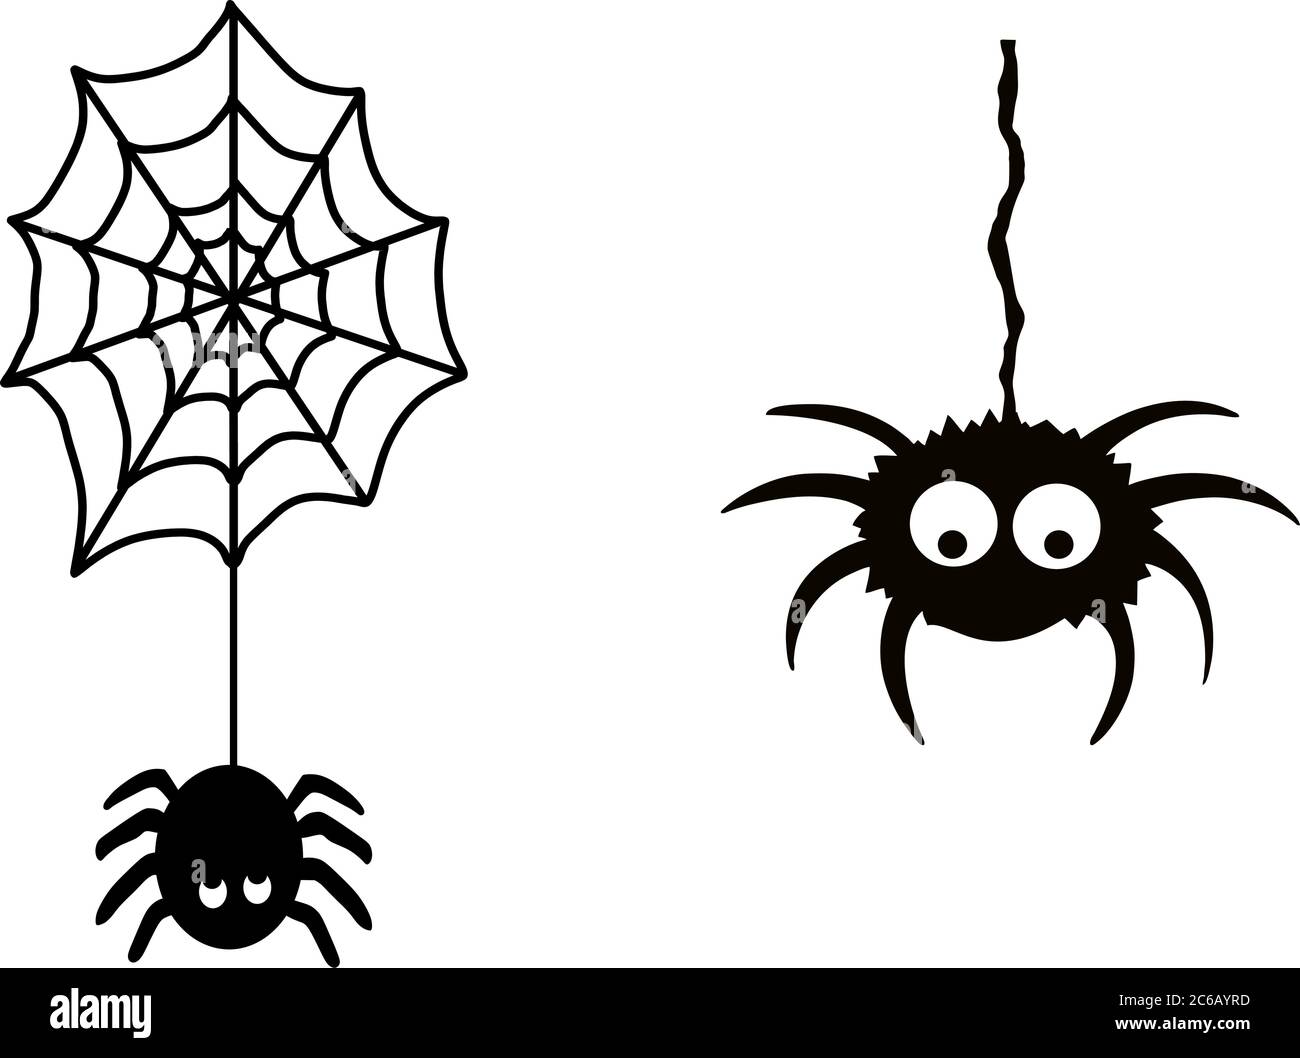 Spider on a white background. Suitable for printing. VECTOR Stock Vector